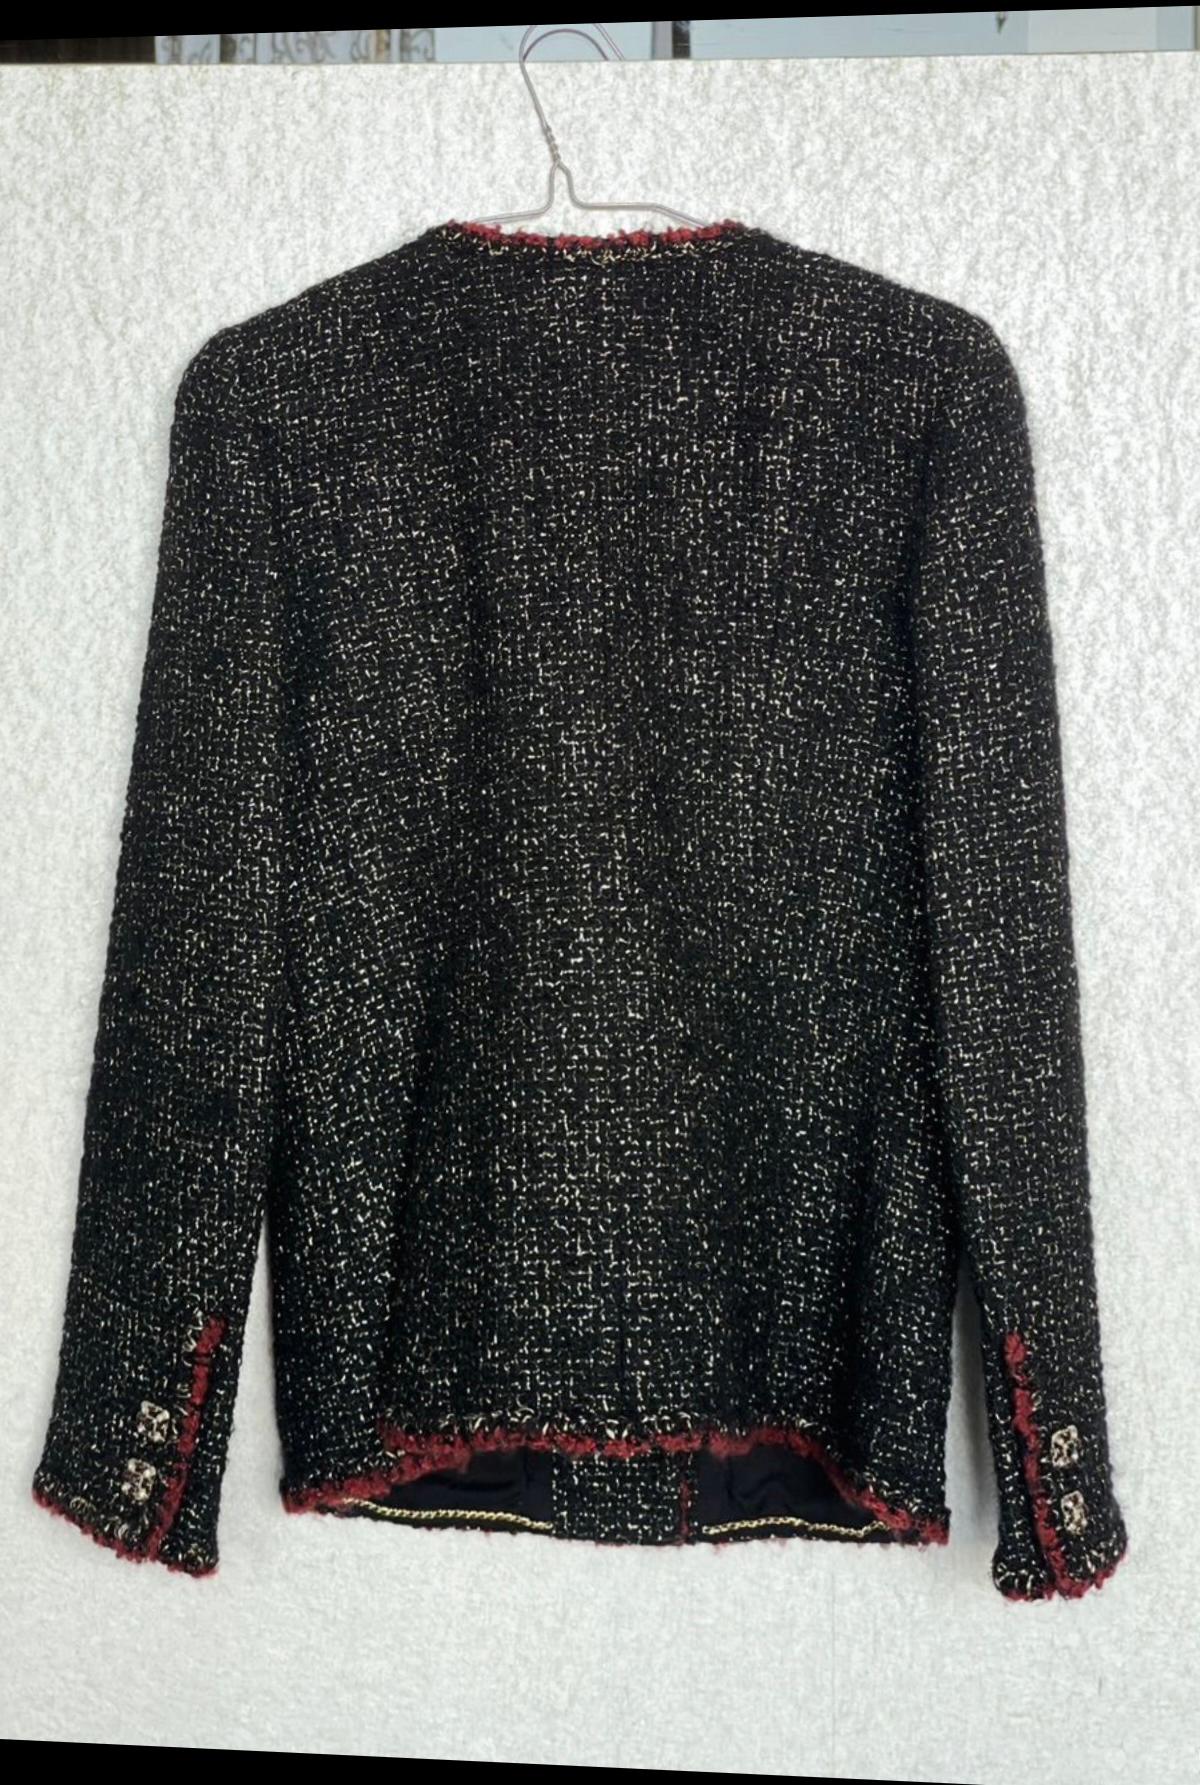 Chanel Iconic CC Jewel Buttons Black Tweed Jacket  For Sale 8